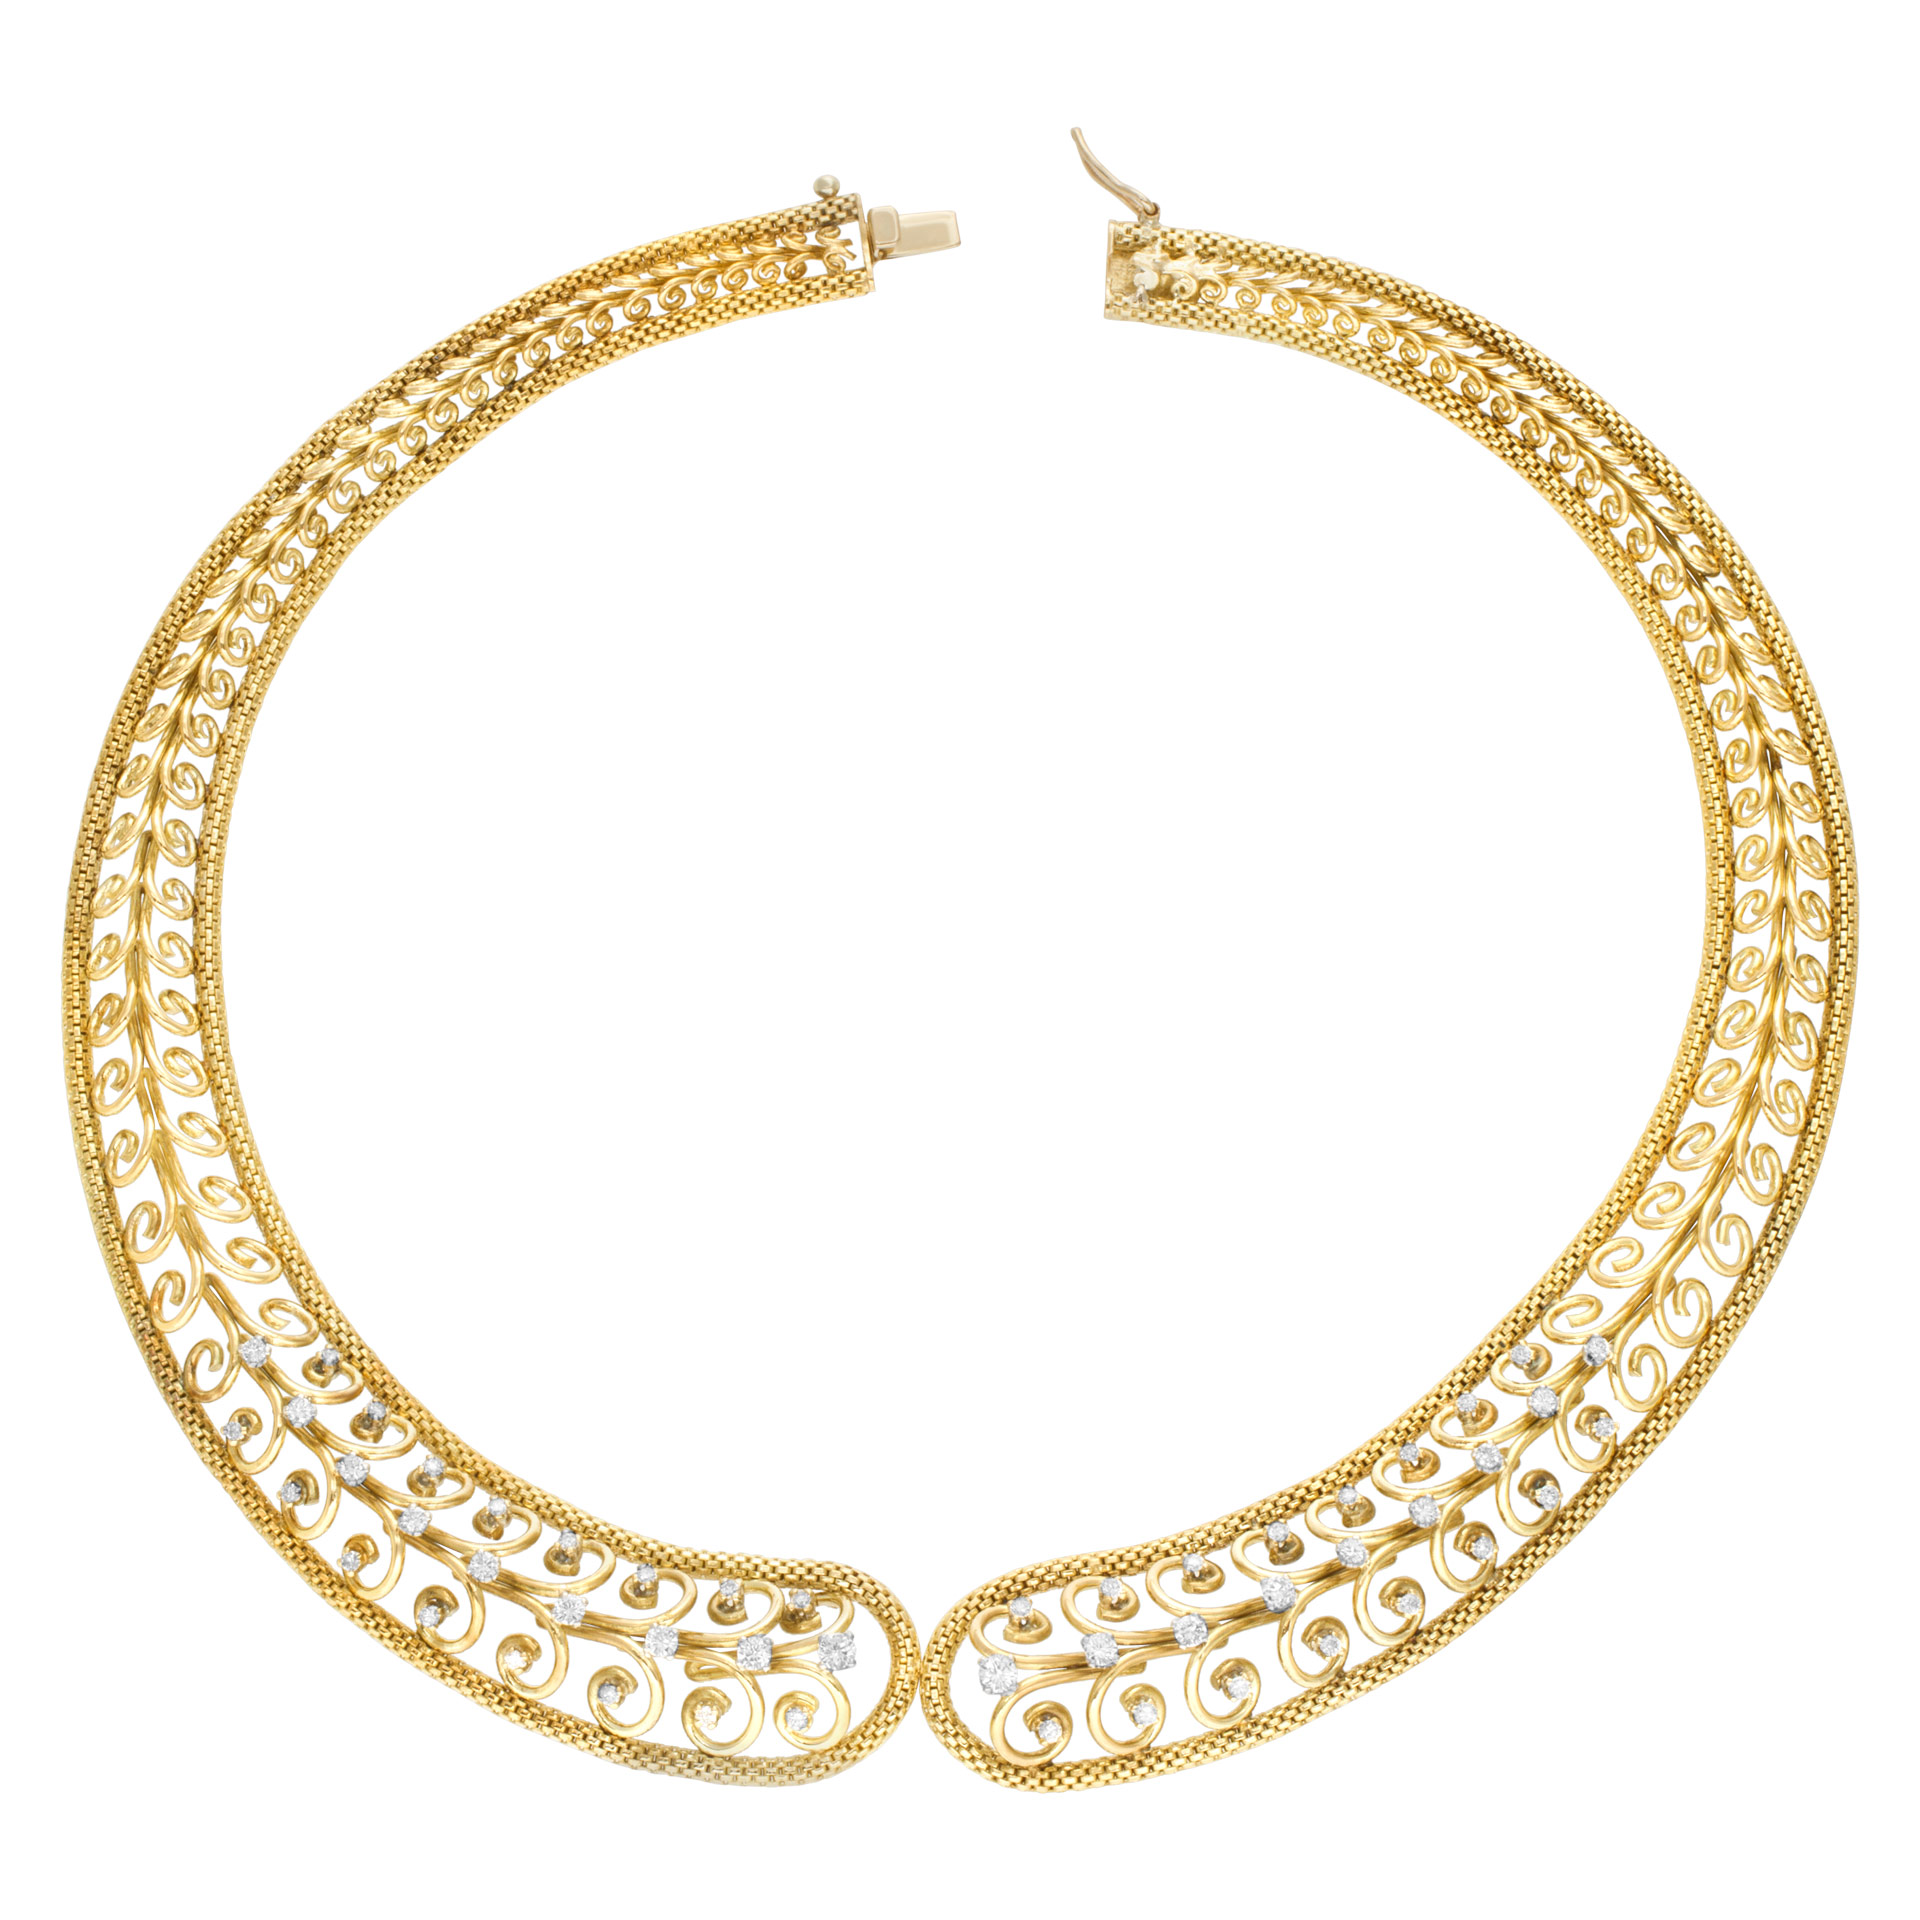 Swirl link choker necklace with diamond accents in 18k (Stones) image 7